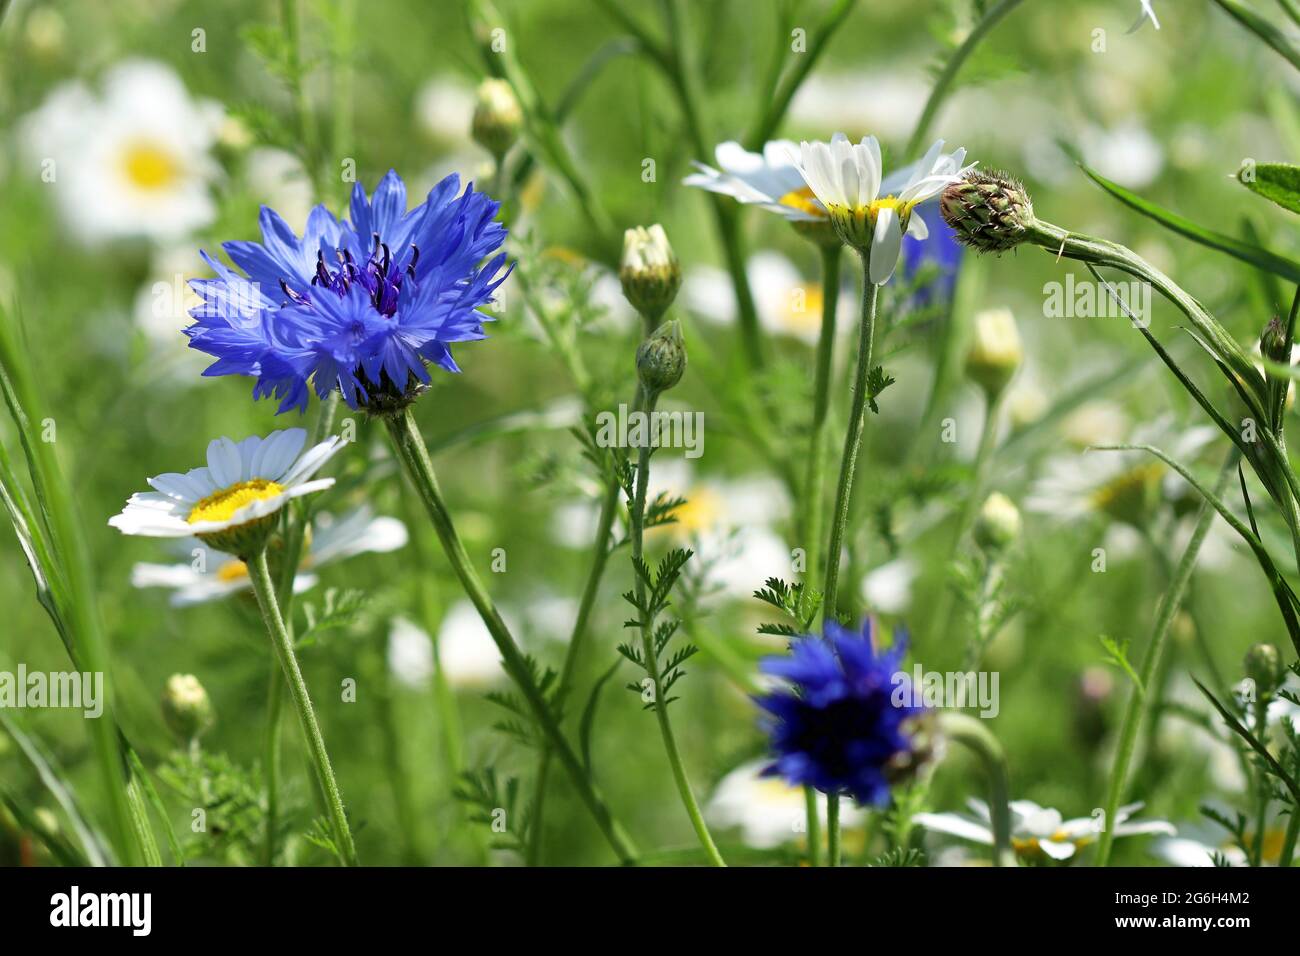 Blue Cornflower Centaurea Cyanus, once considered a weed of grain fields, now a much loved wild flower.  Oxeye daisies can be seen in the background Stock Photo